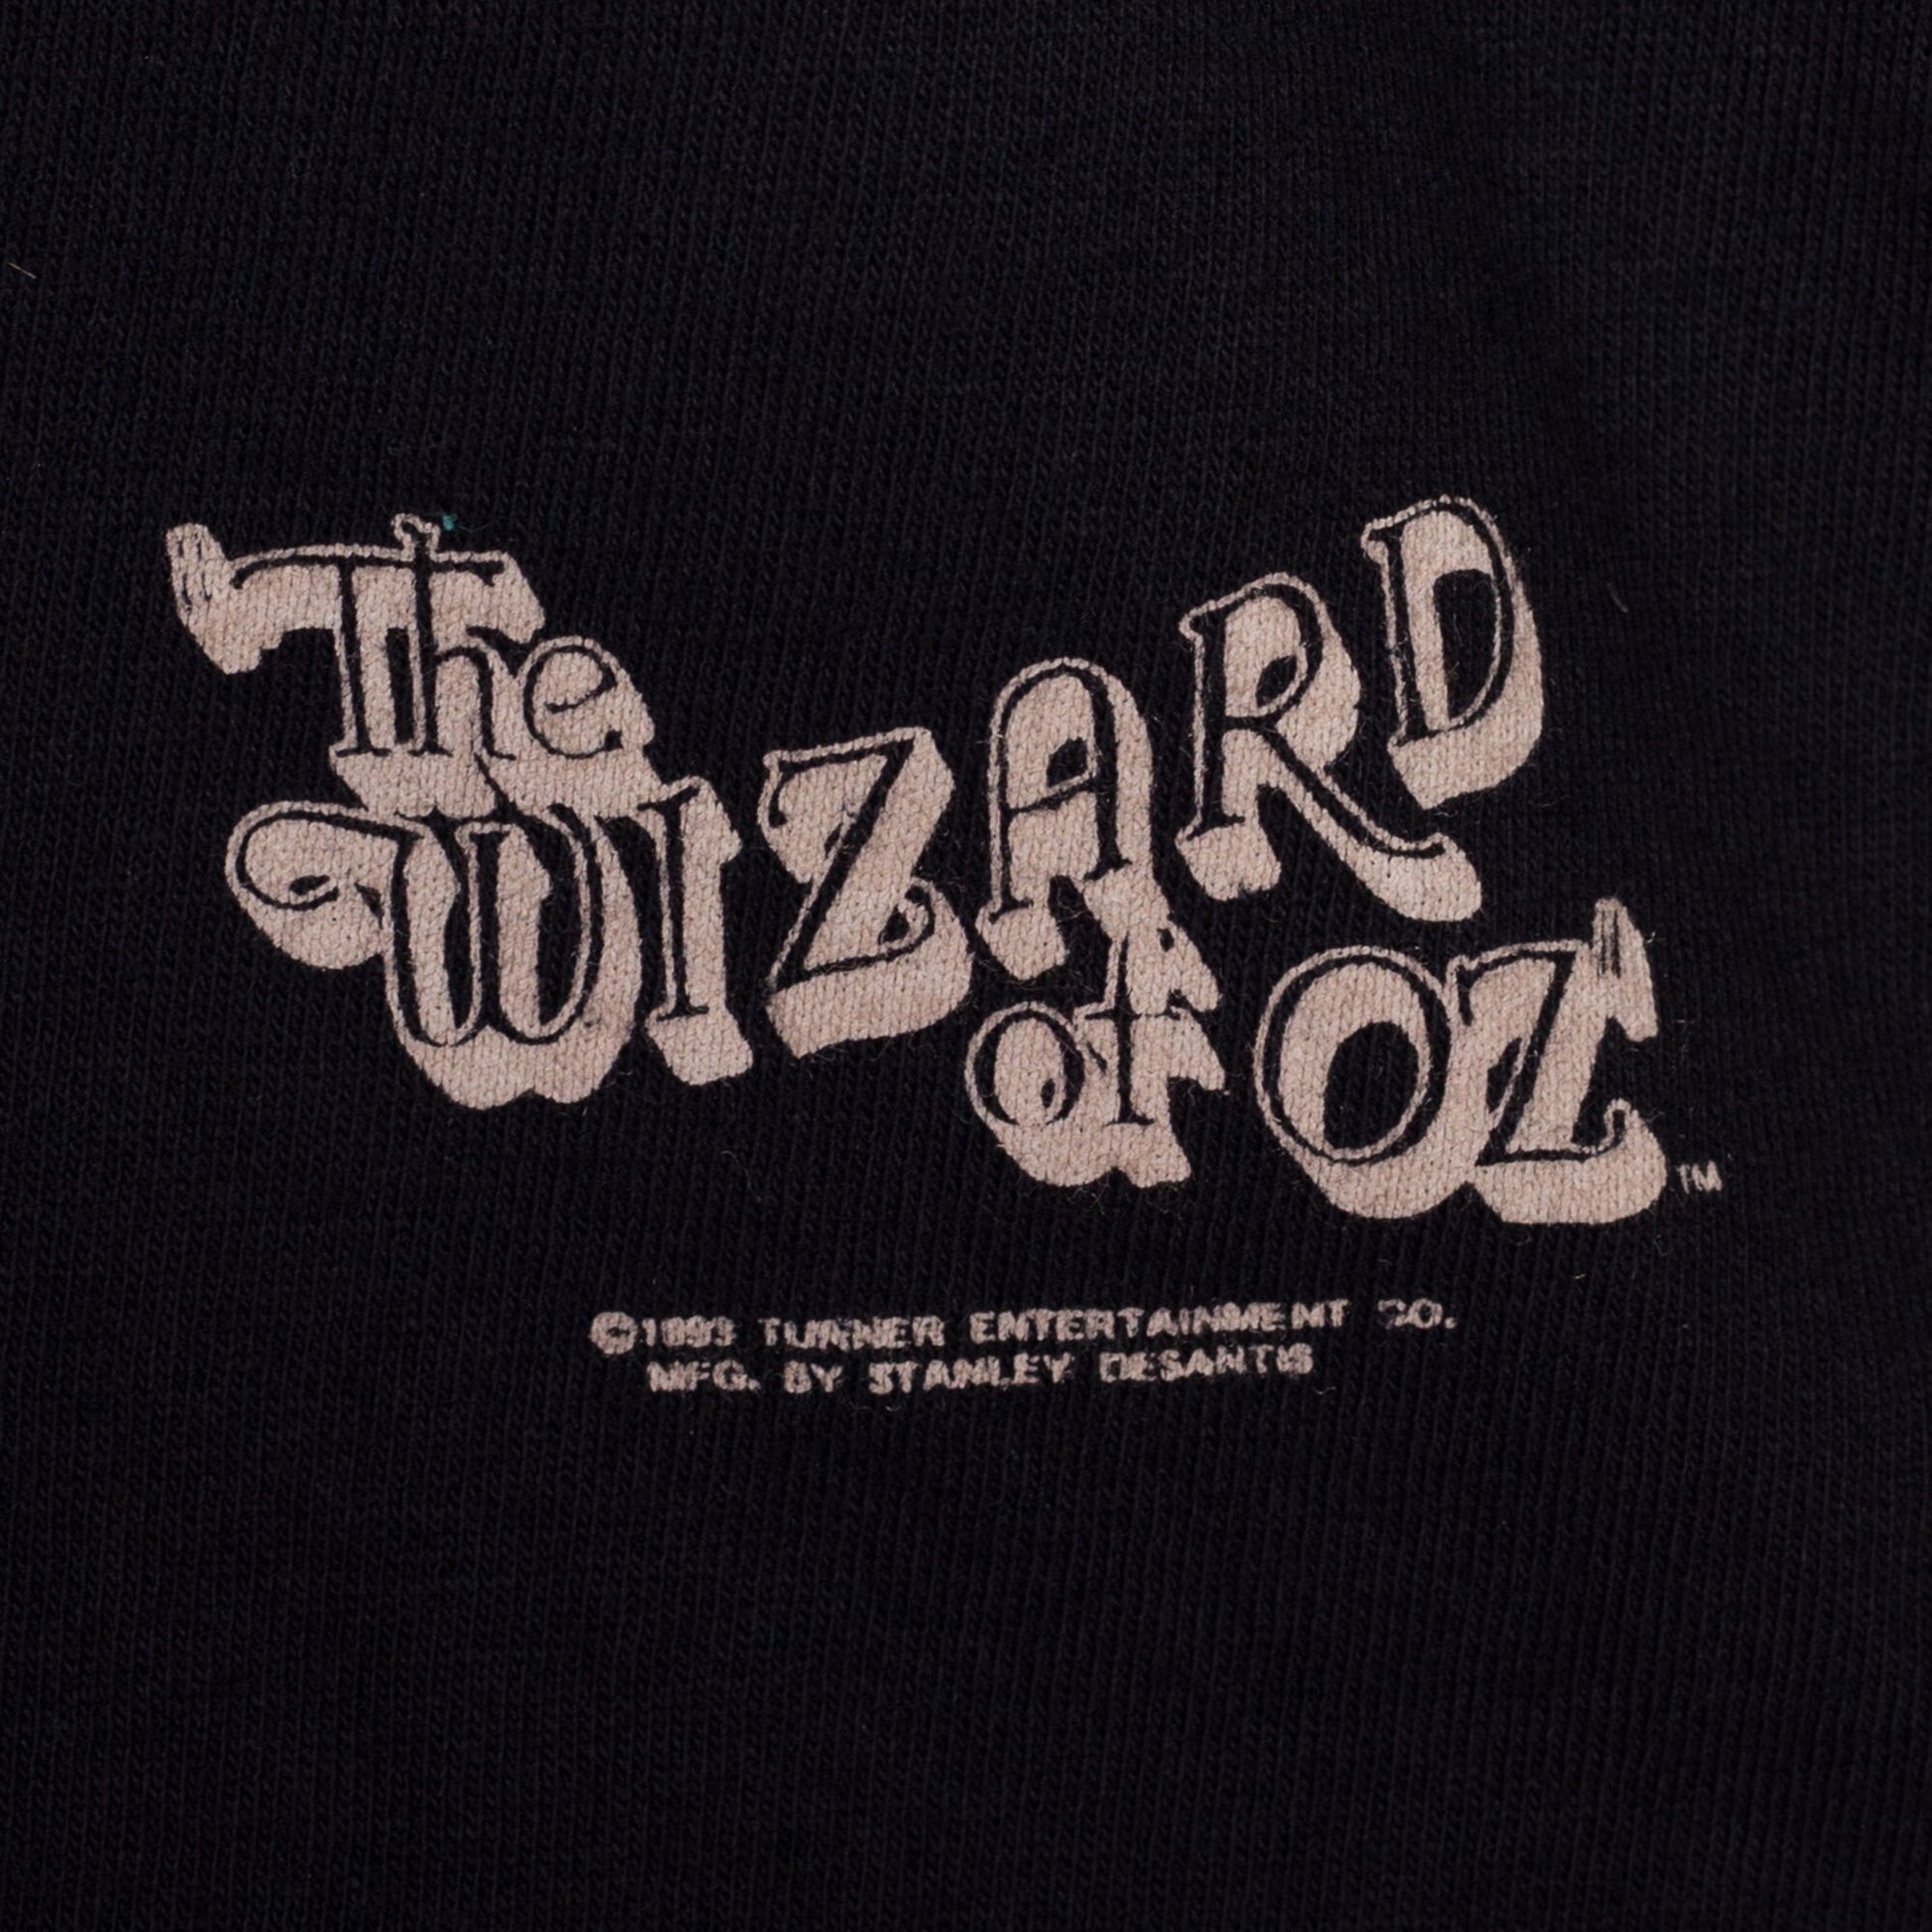 M| Vintage 1993 Wizard Of Oz Stanley Desantis "There's No Place Like Home" T Shirt - Unisex Medium | Rare 90s Dorothy Ruby Slippers Tee